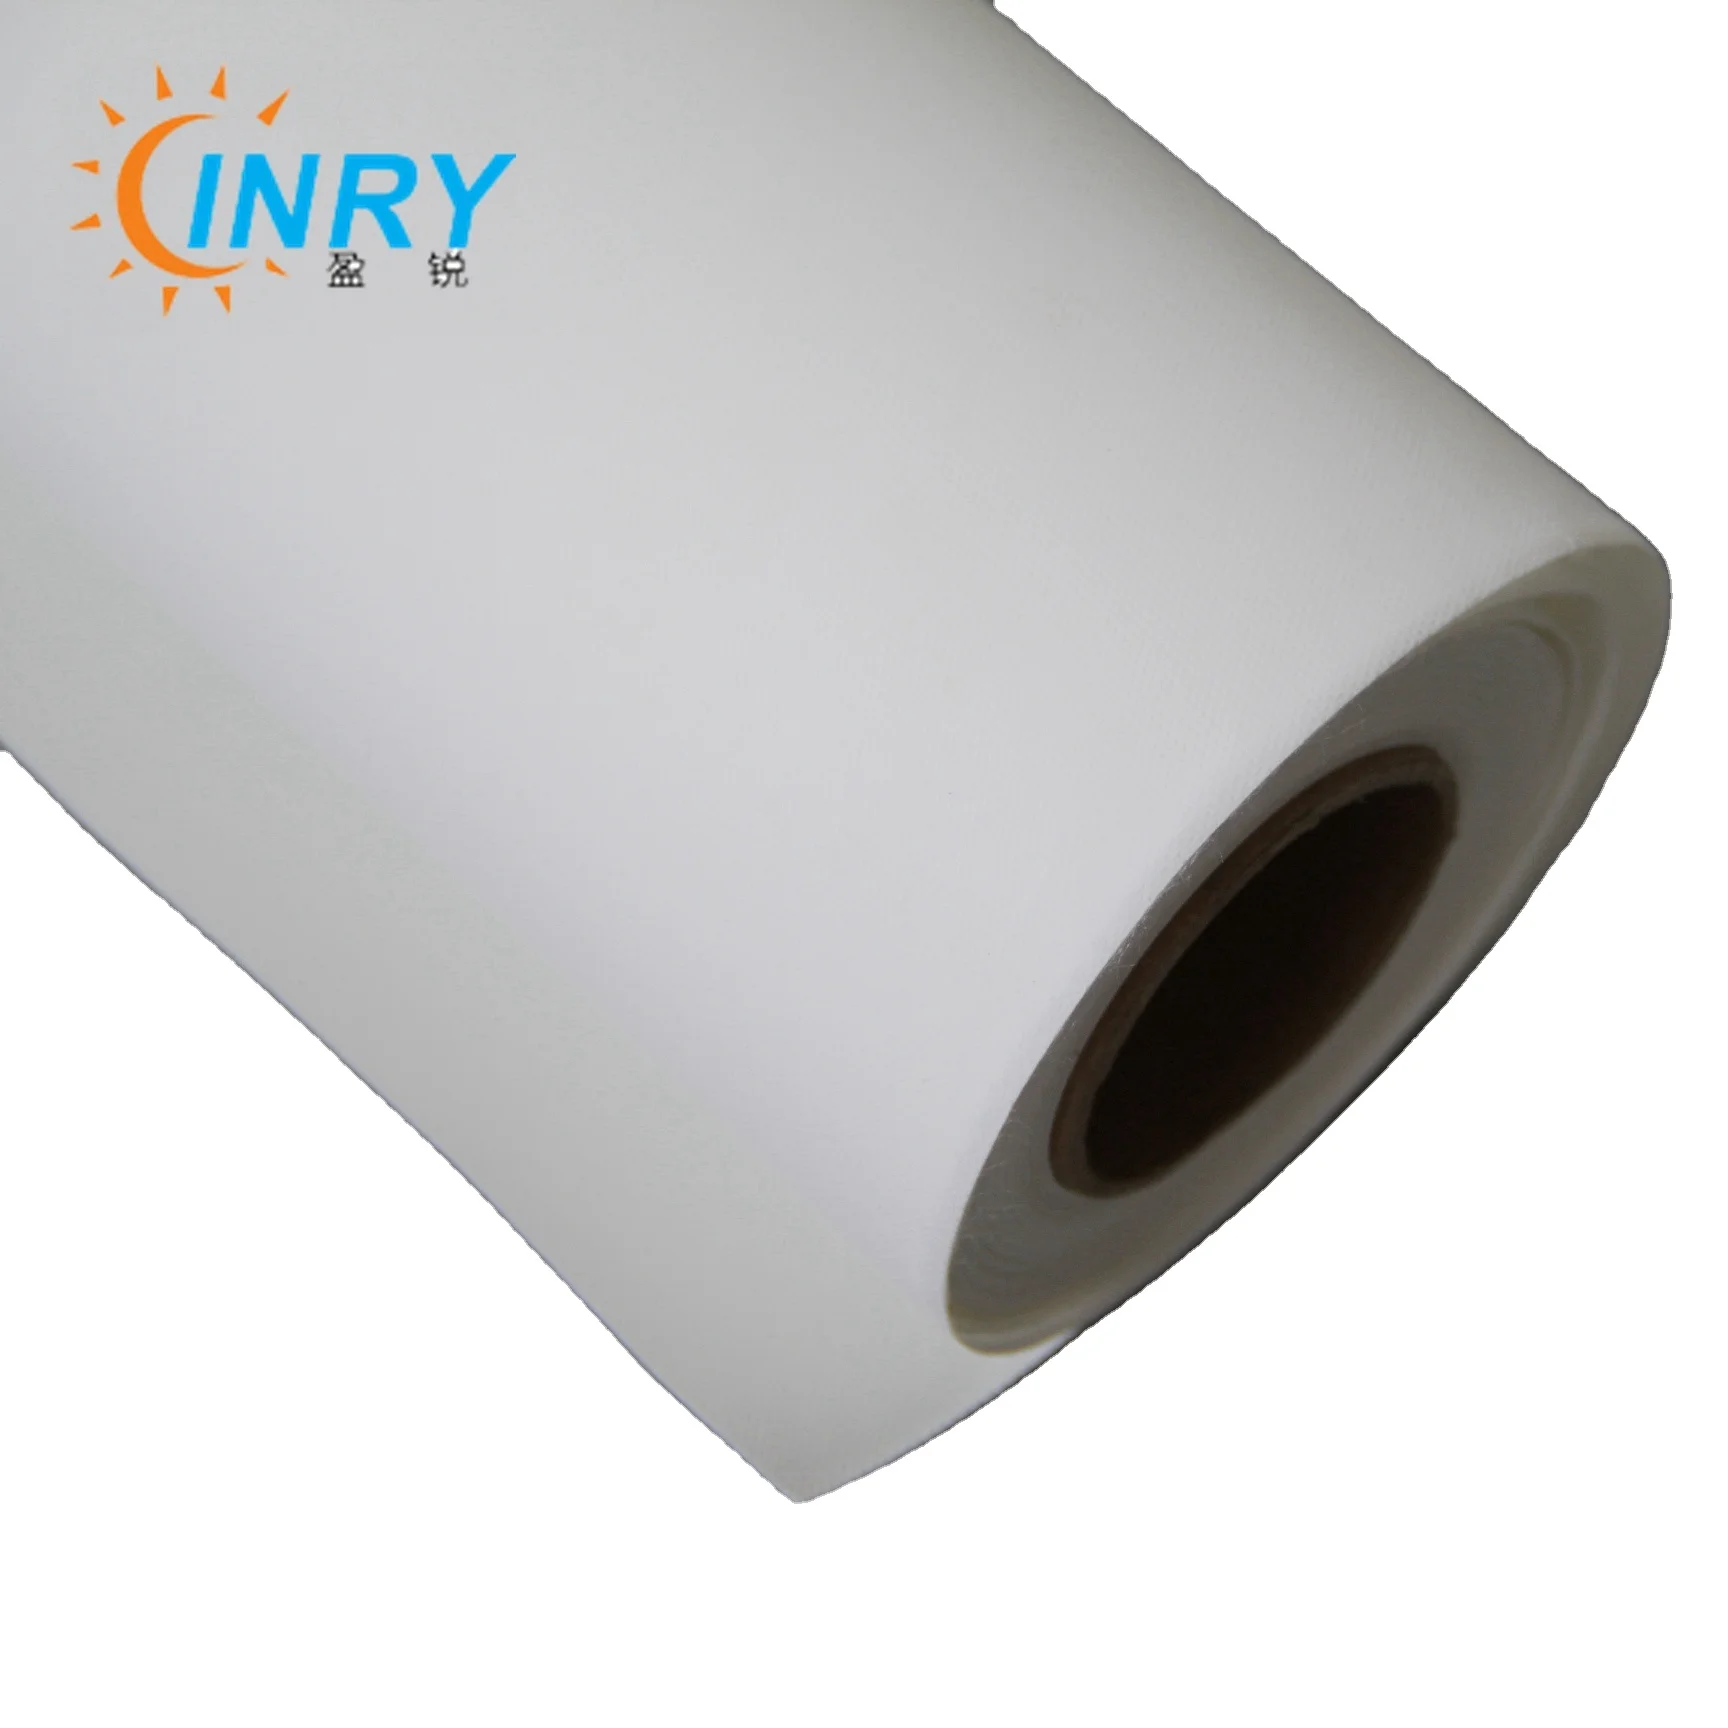 Brilliant White Water Resistant 42" x 30m 280gsm Inkjet Poly Canvas Roll Matte 